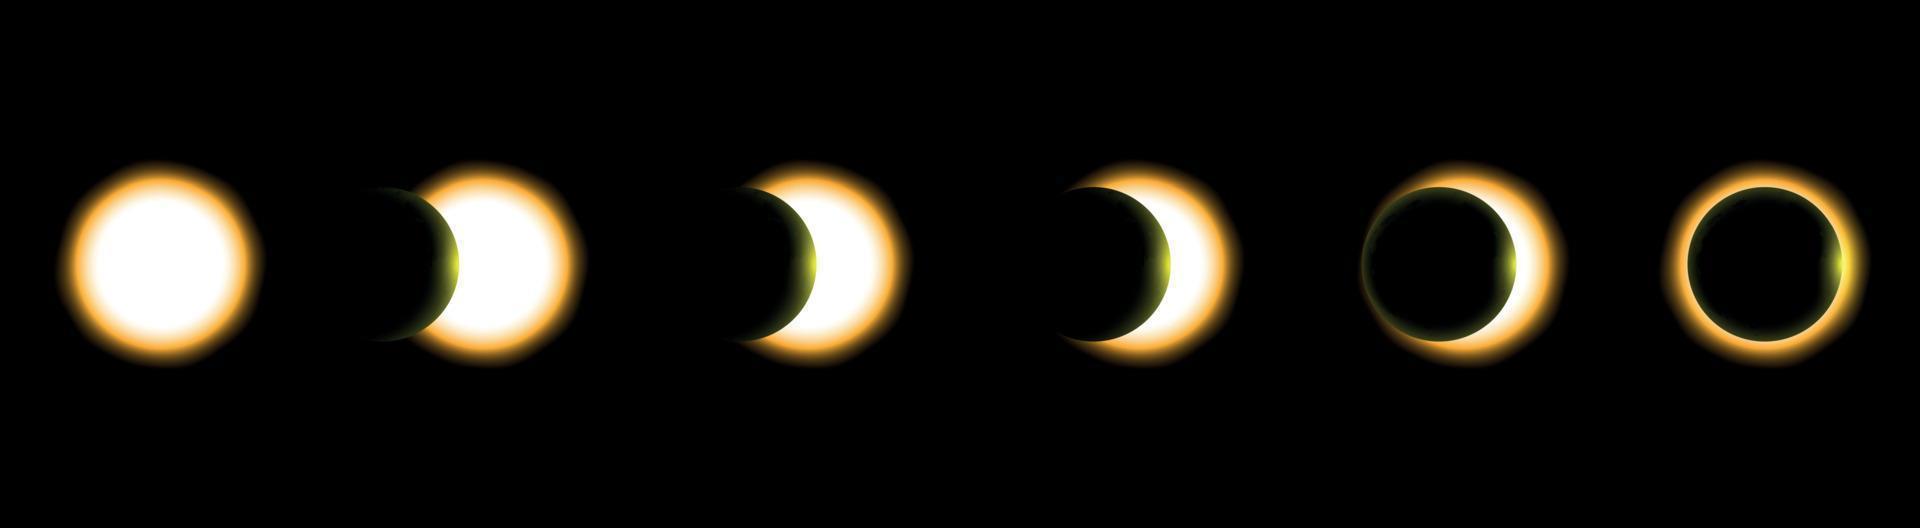 total solar eclipse, eclipse of the sun vector